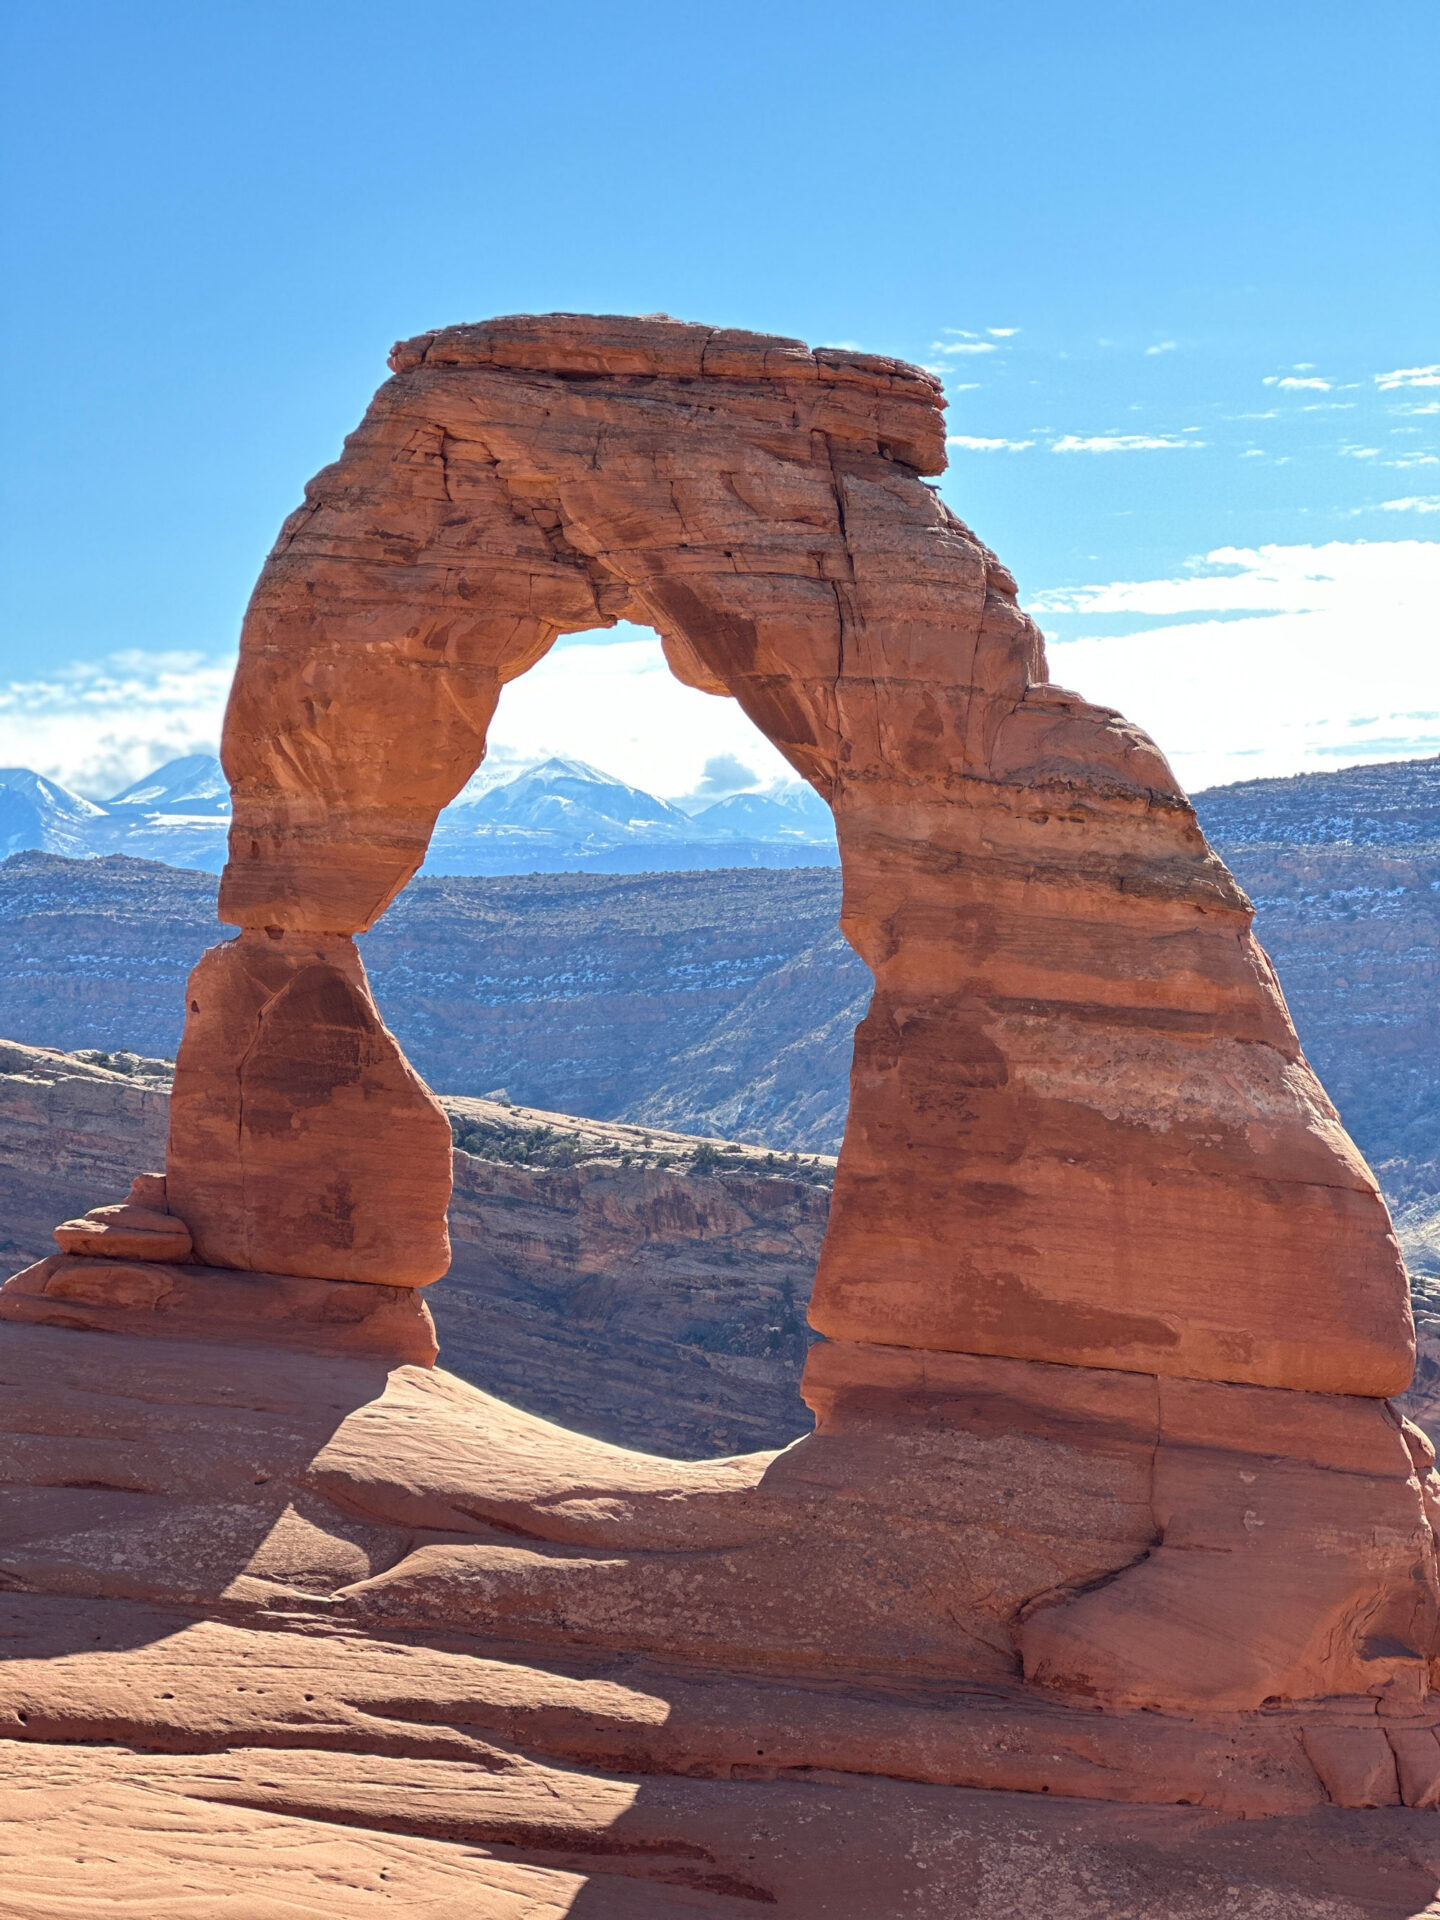 Delicate Arch, a towering sandstone arch in Arches National Park, Utah, soars gracefully above a sloping desert landscape. The arch is approximately 46 feet tall and 32 feet wide, with a delicate appearance that defies its massive size. Its smooth, rounded surface is a testament to the millions of years of erosion that have shaped it. In the background, a range of rugged mountains rises up, their peaks capped with snow. The sky is a clear blue, with a few white clouds floating by.